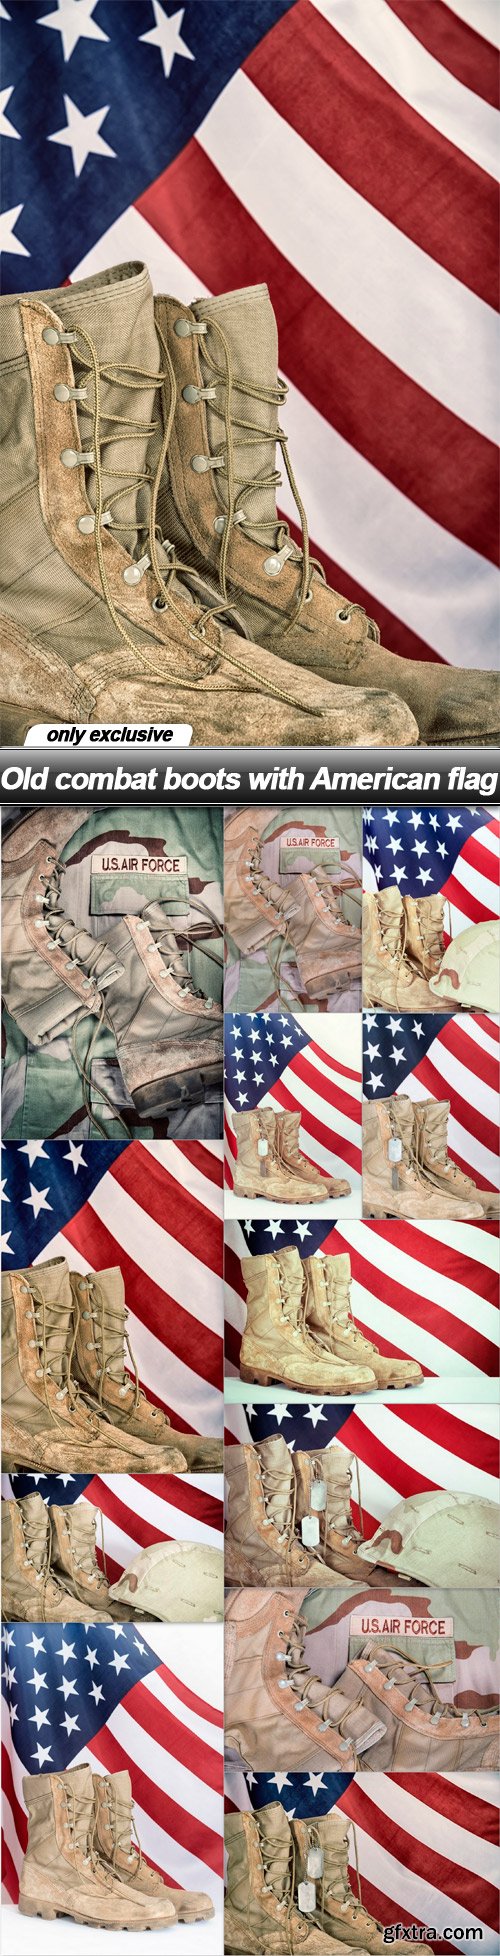 Old combat boots with American flag - 12 UHQ JPEG